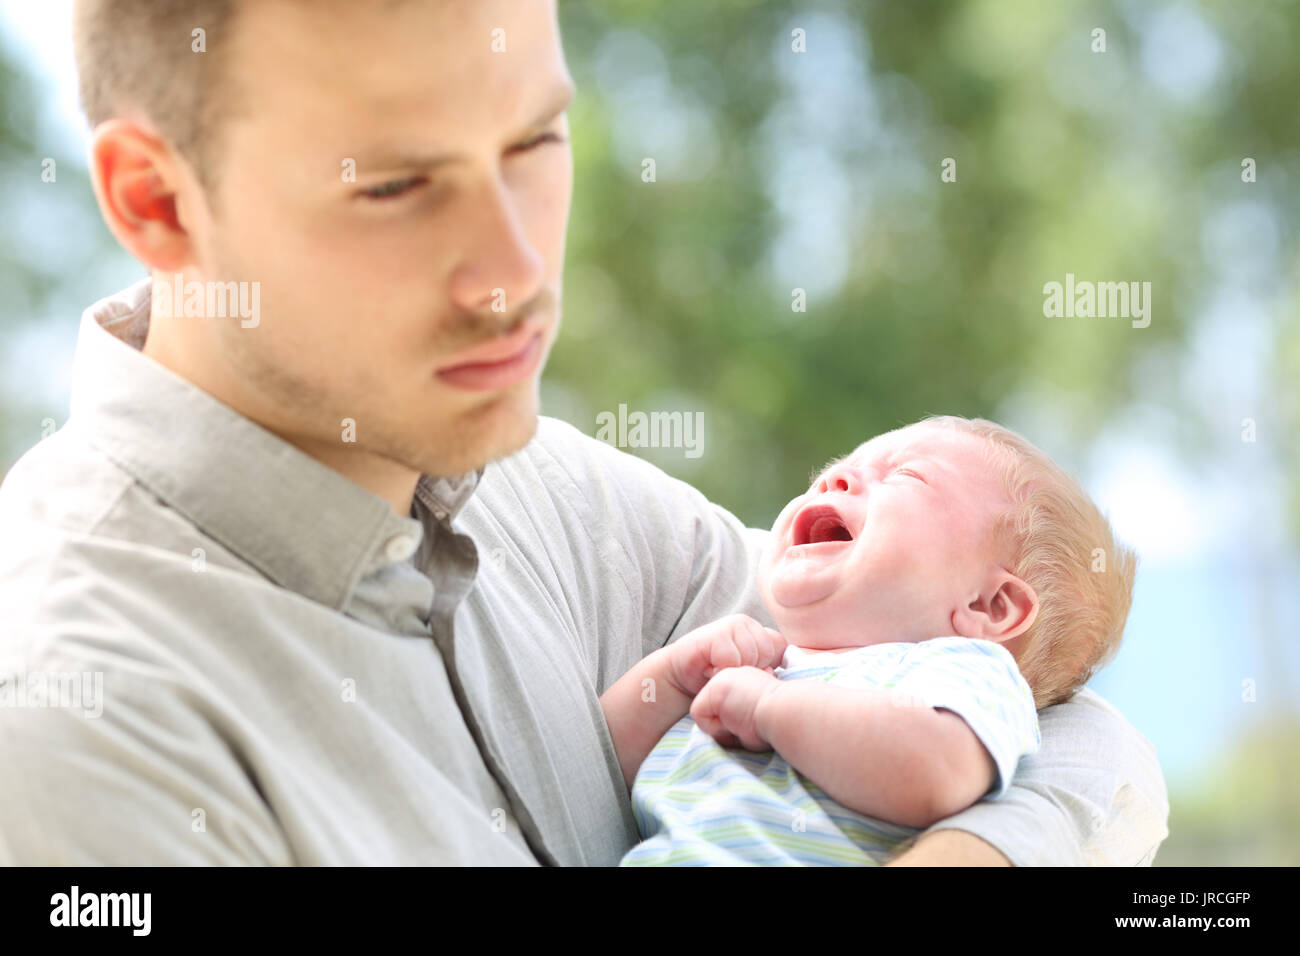 Baby crying and bored father outdoors Stock Photo